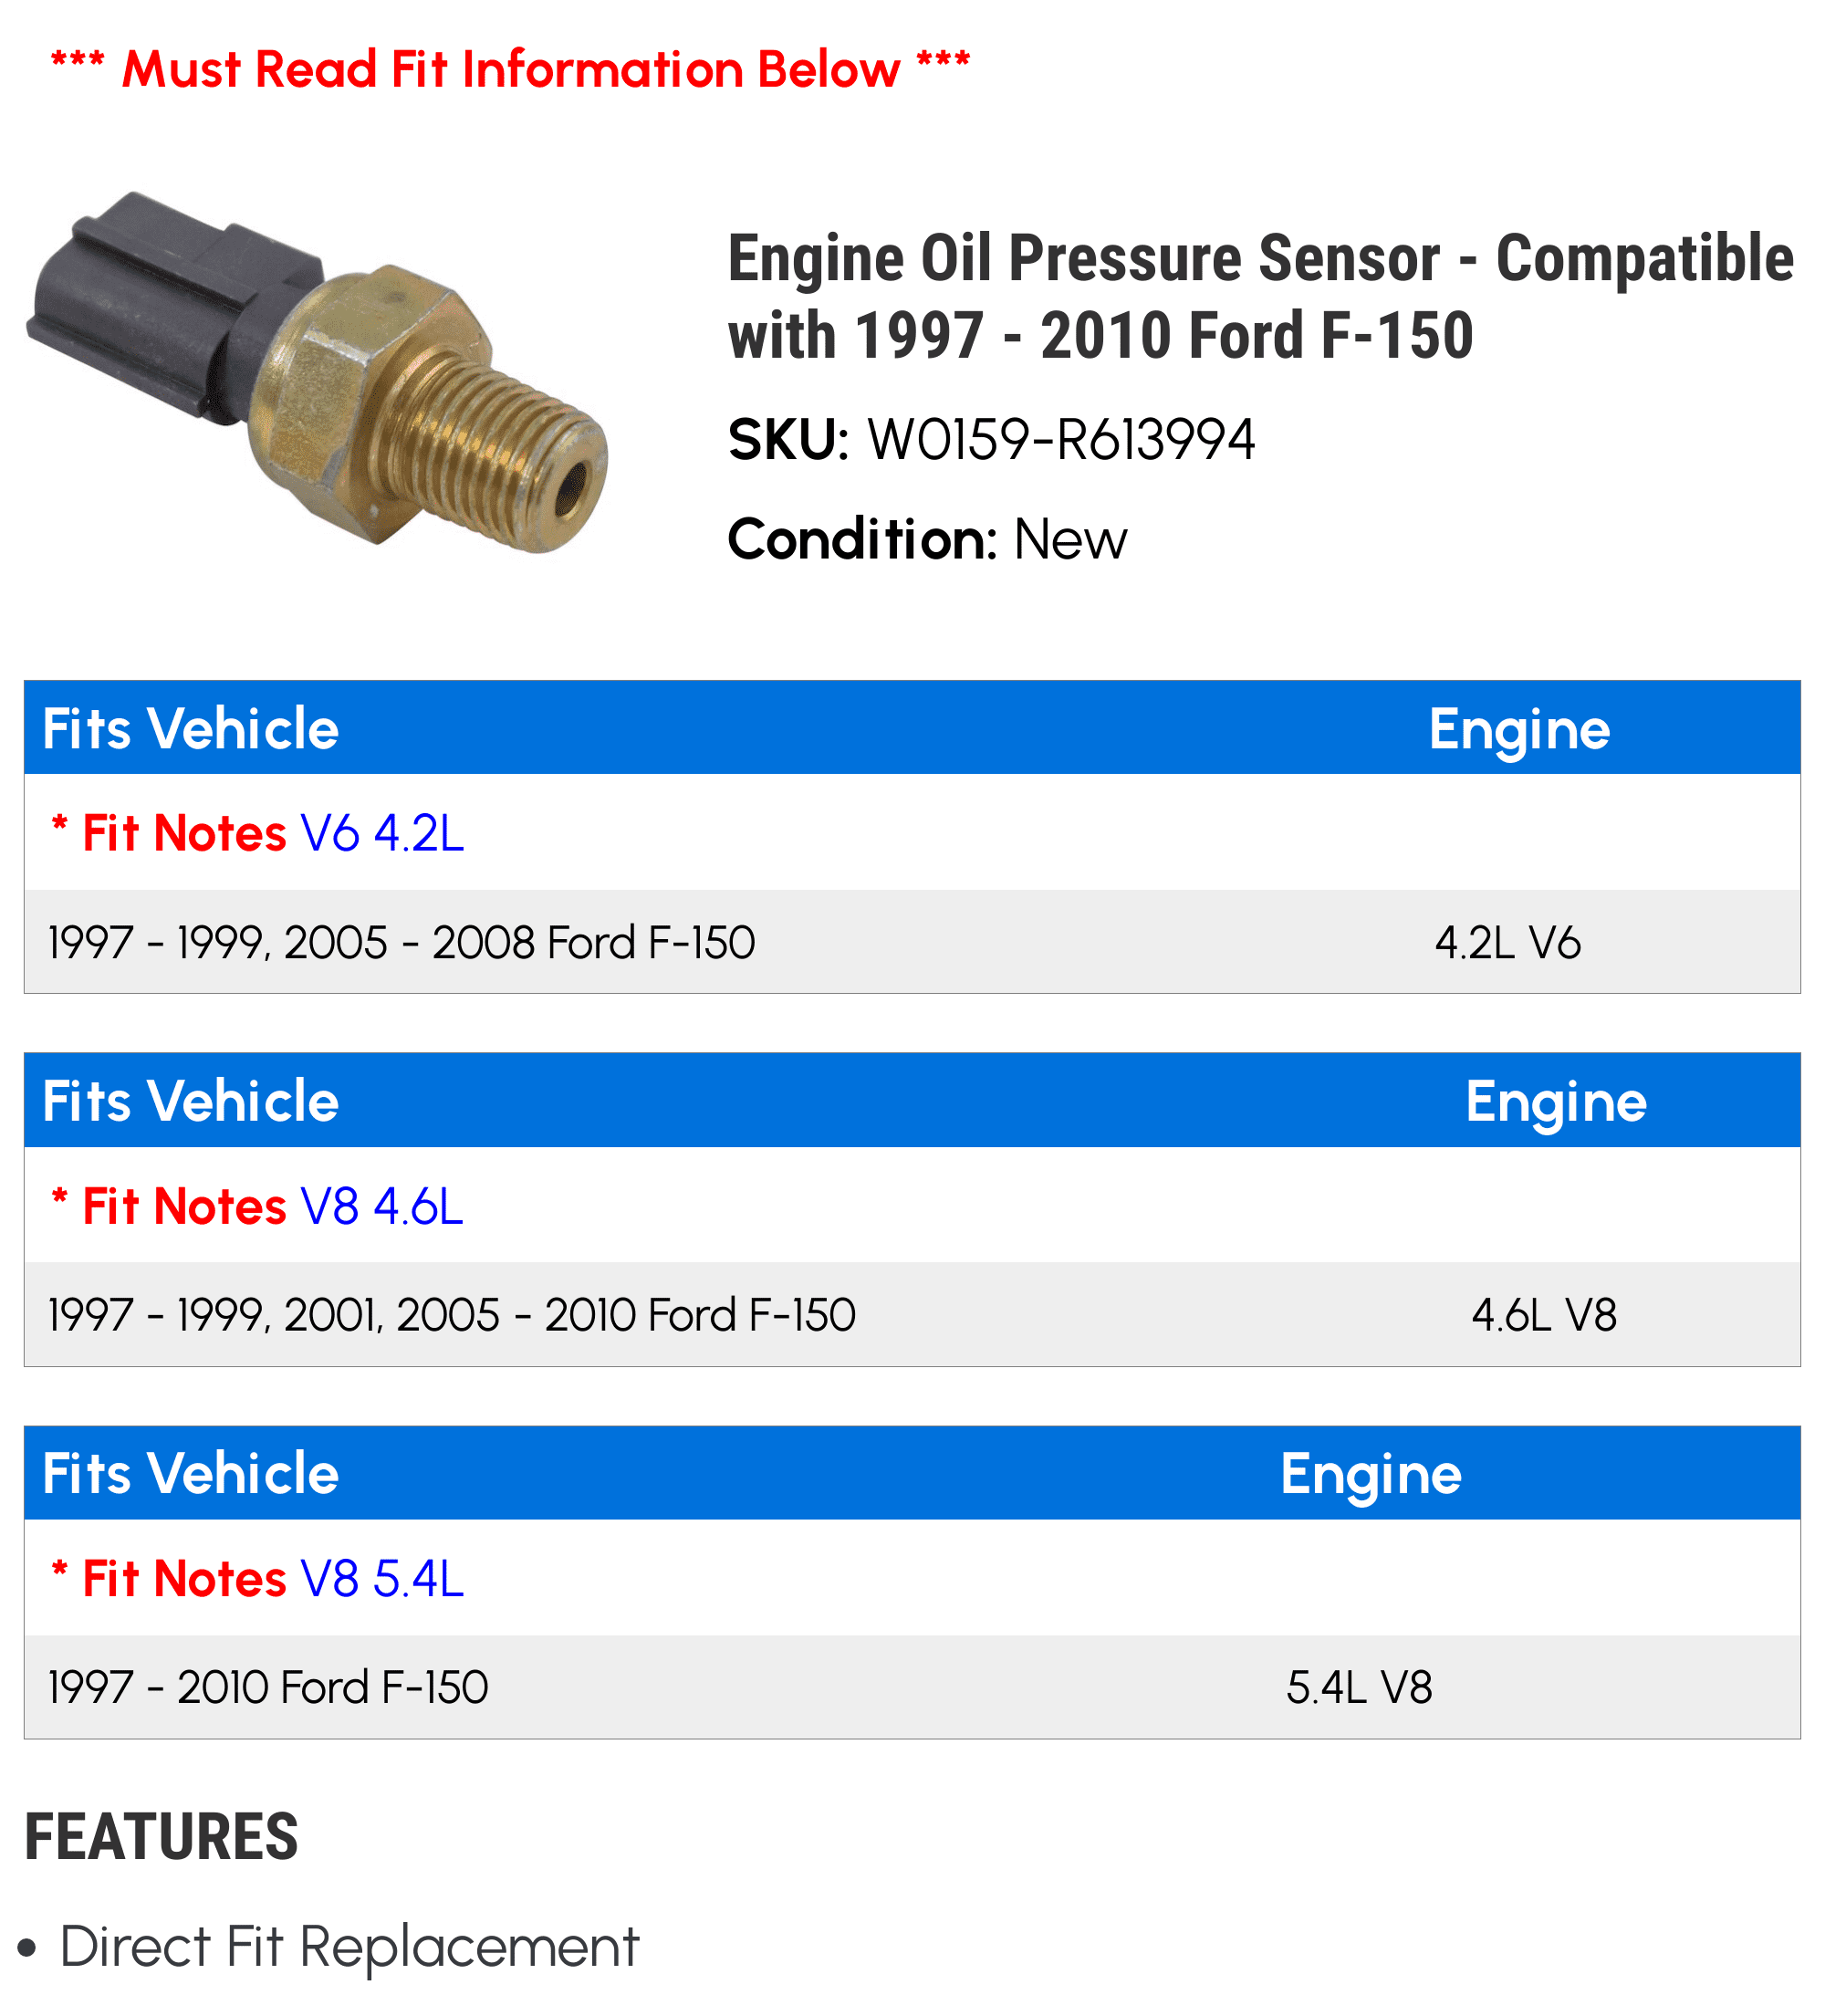 Compatible with 1997-2010 Ford F-150 Engine Oil Pressure Sensor 